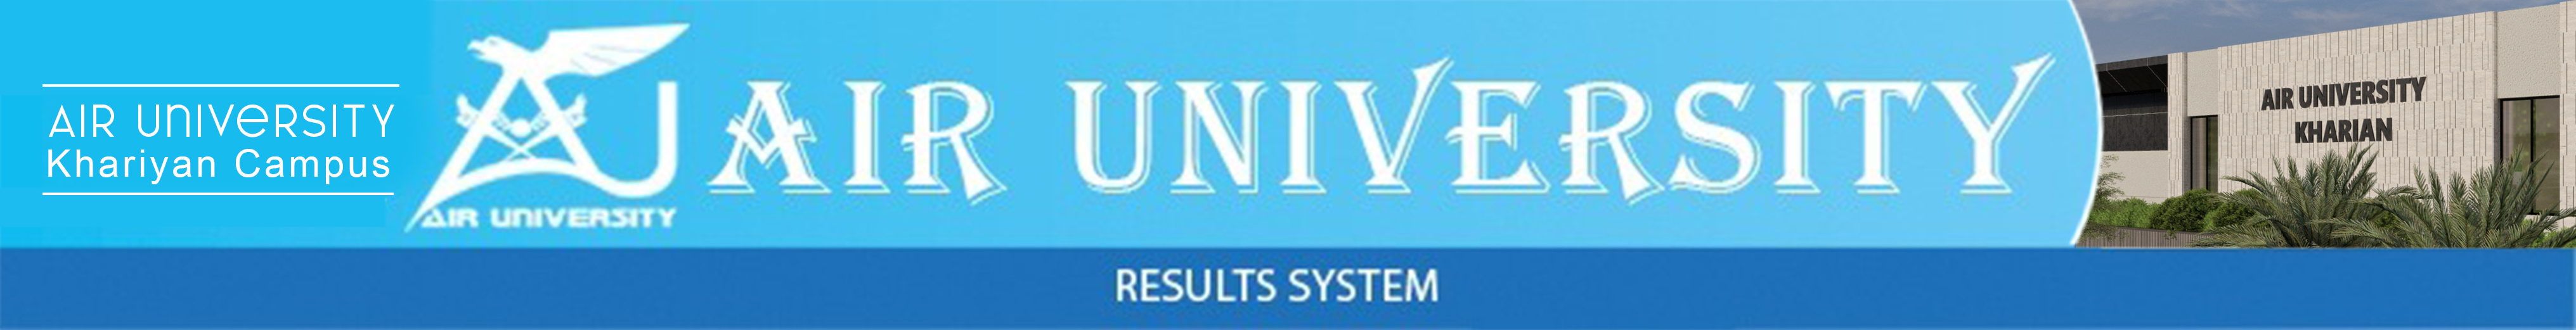 Air University Admissions Result System 